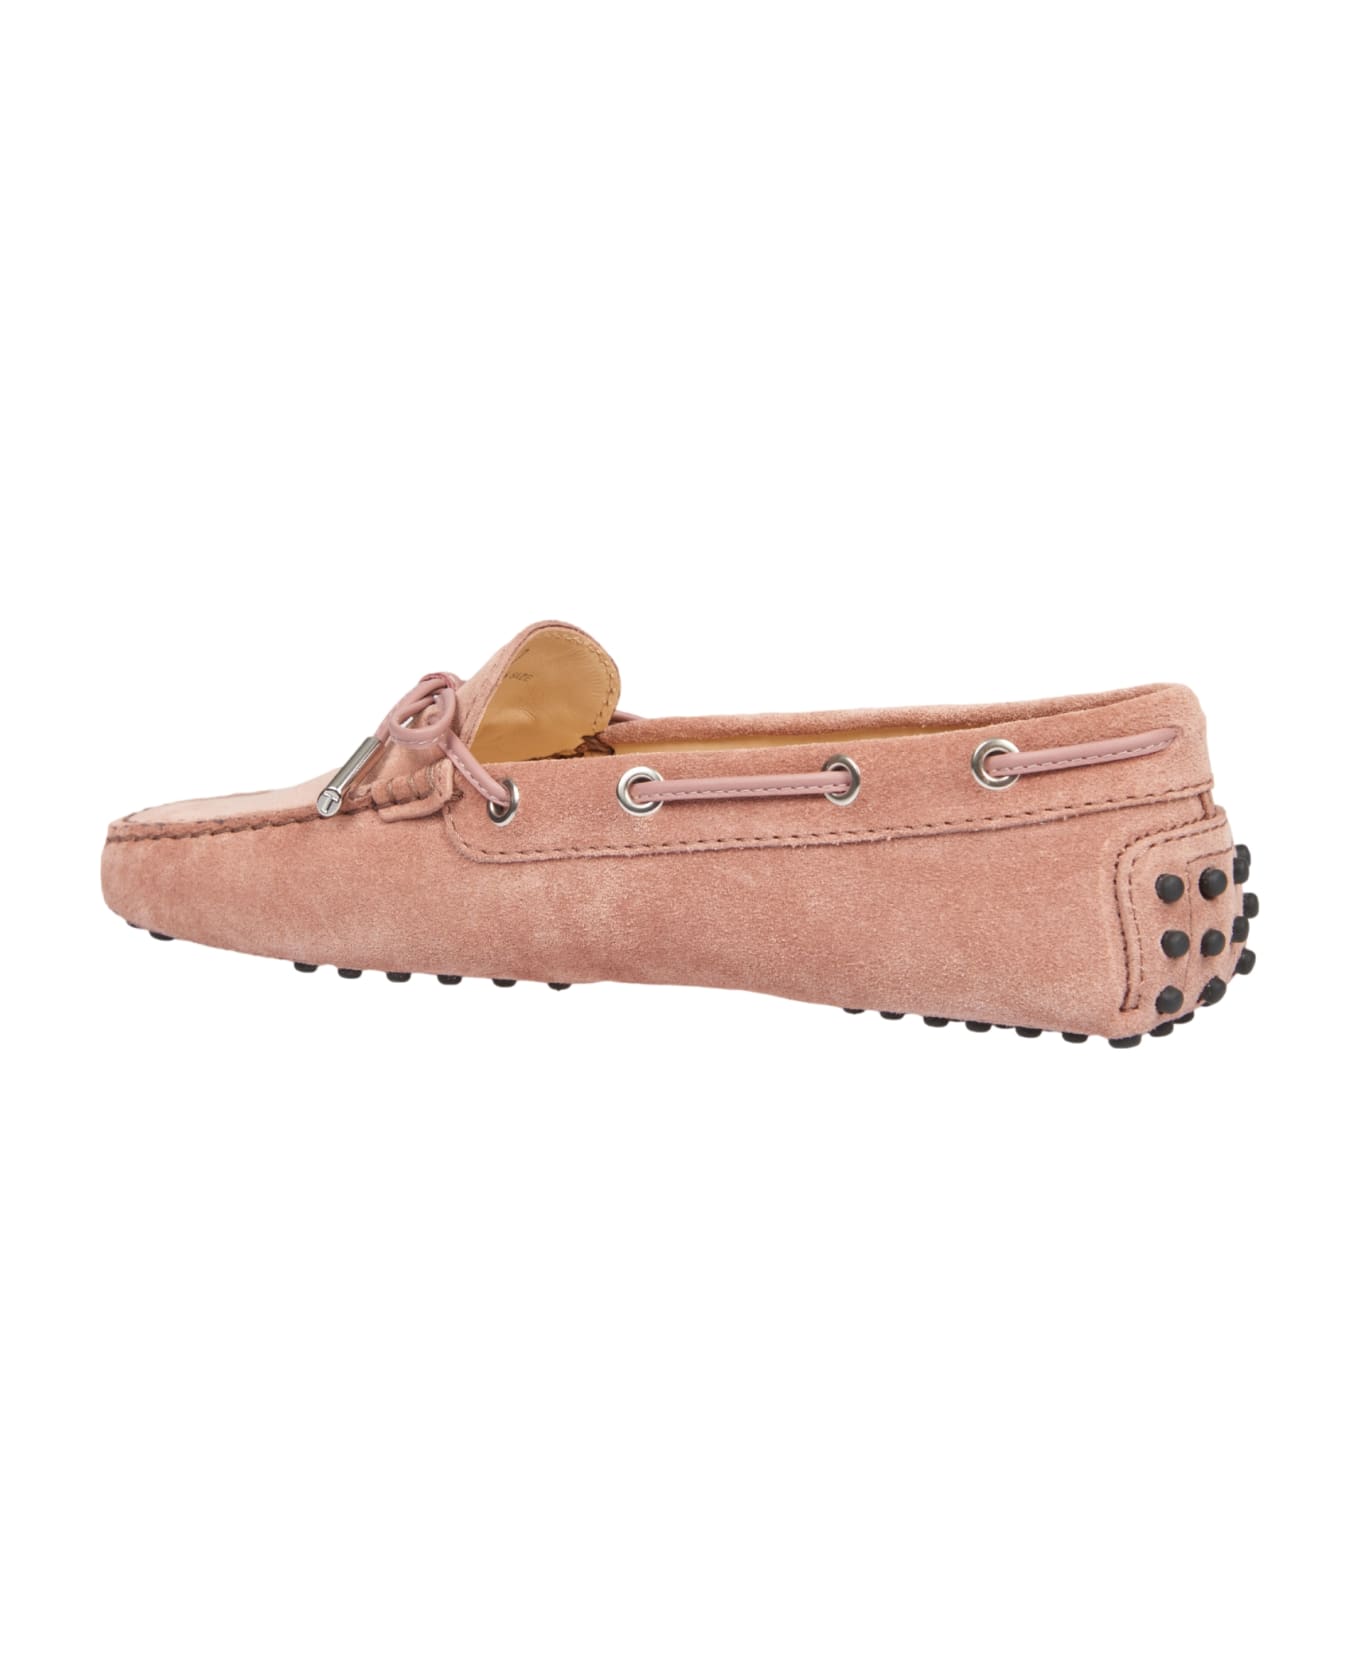 Tod's Gommino Driving Moccasins - Pink